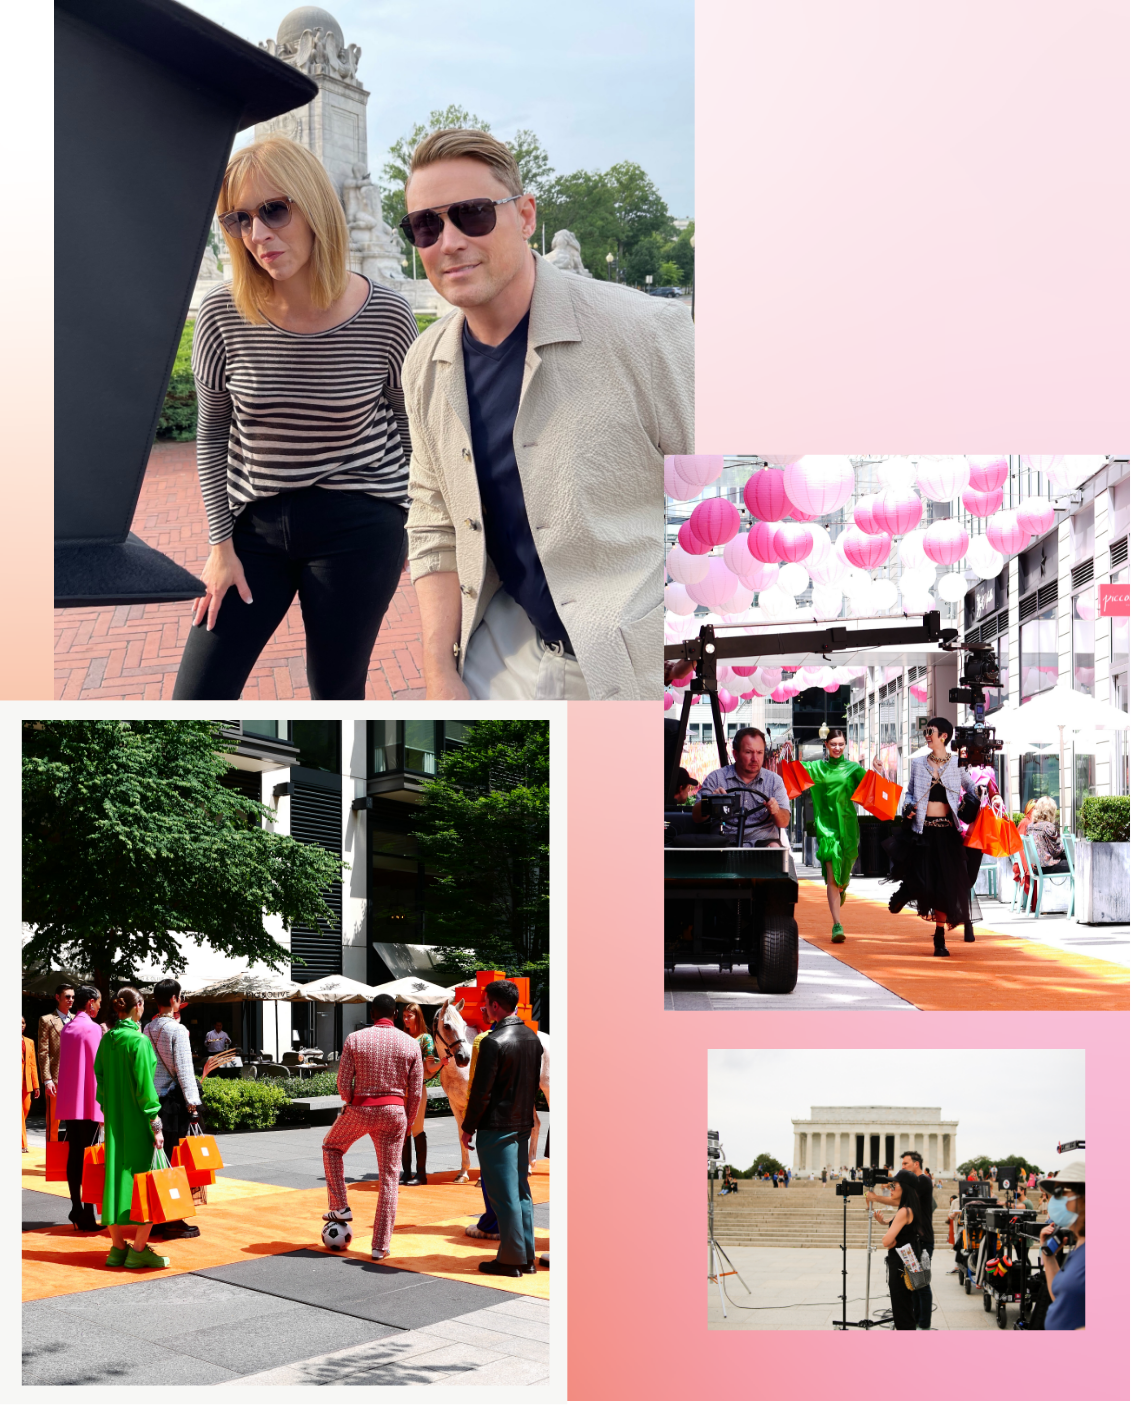 Collaged images of behind the scenes from the film shoot at CityCenterDC